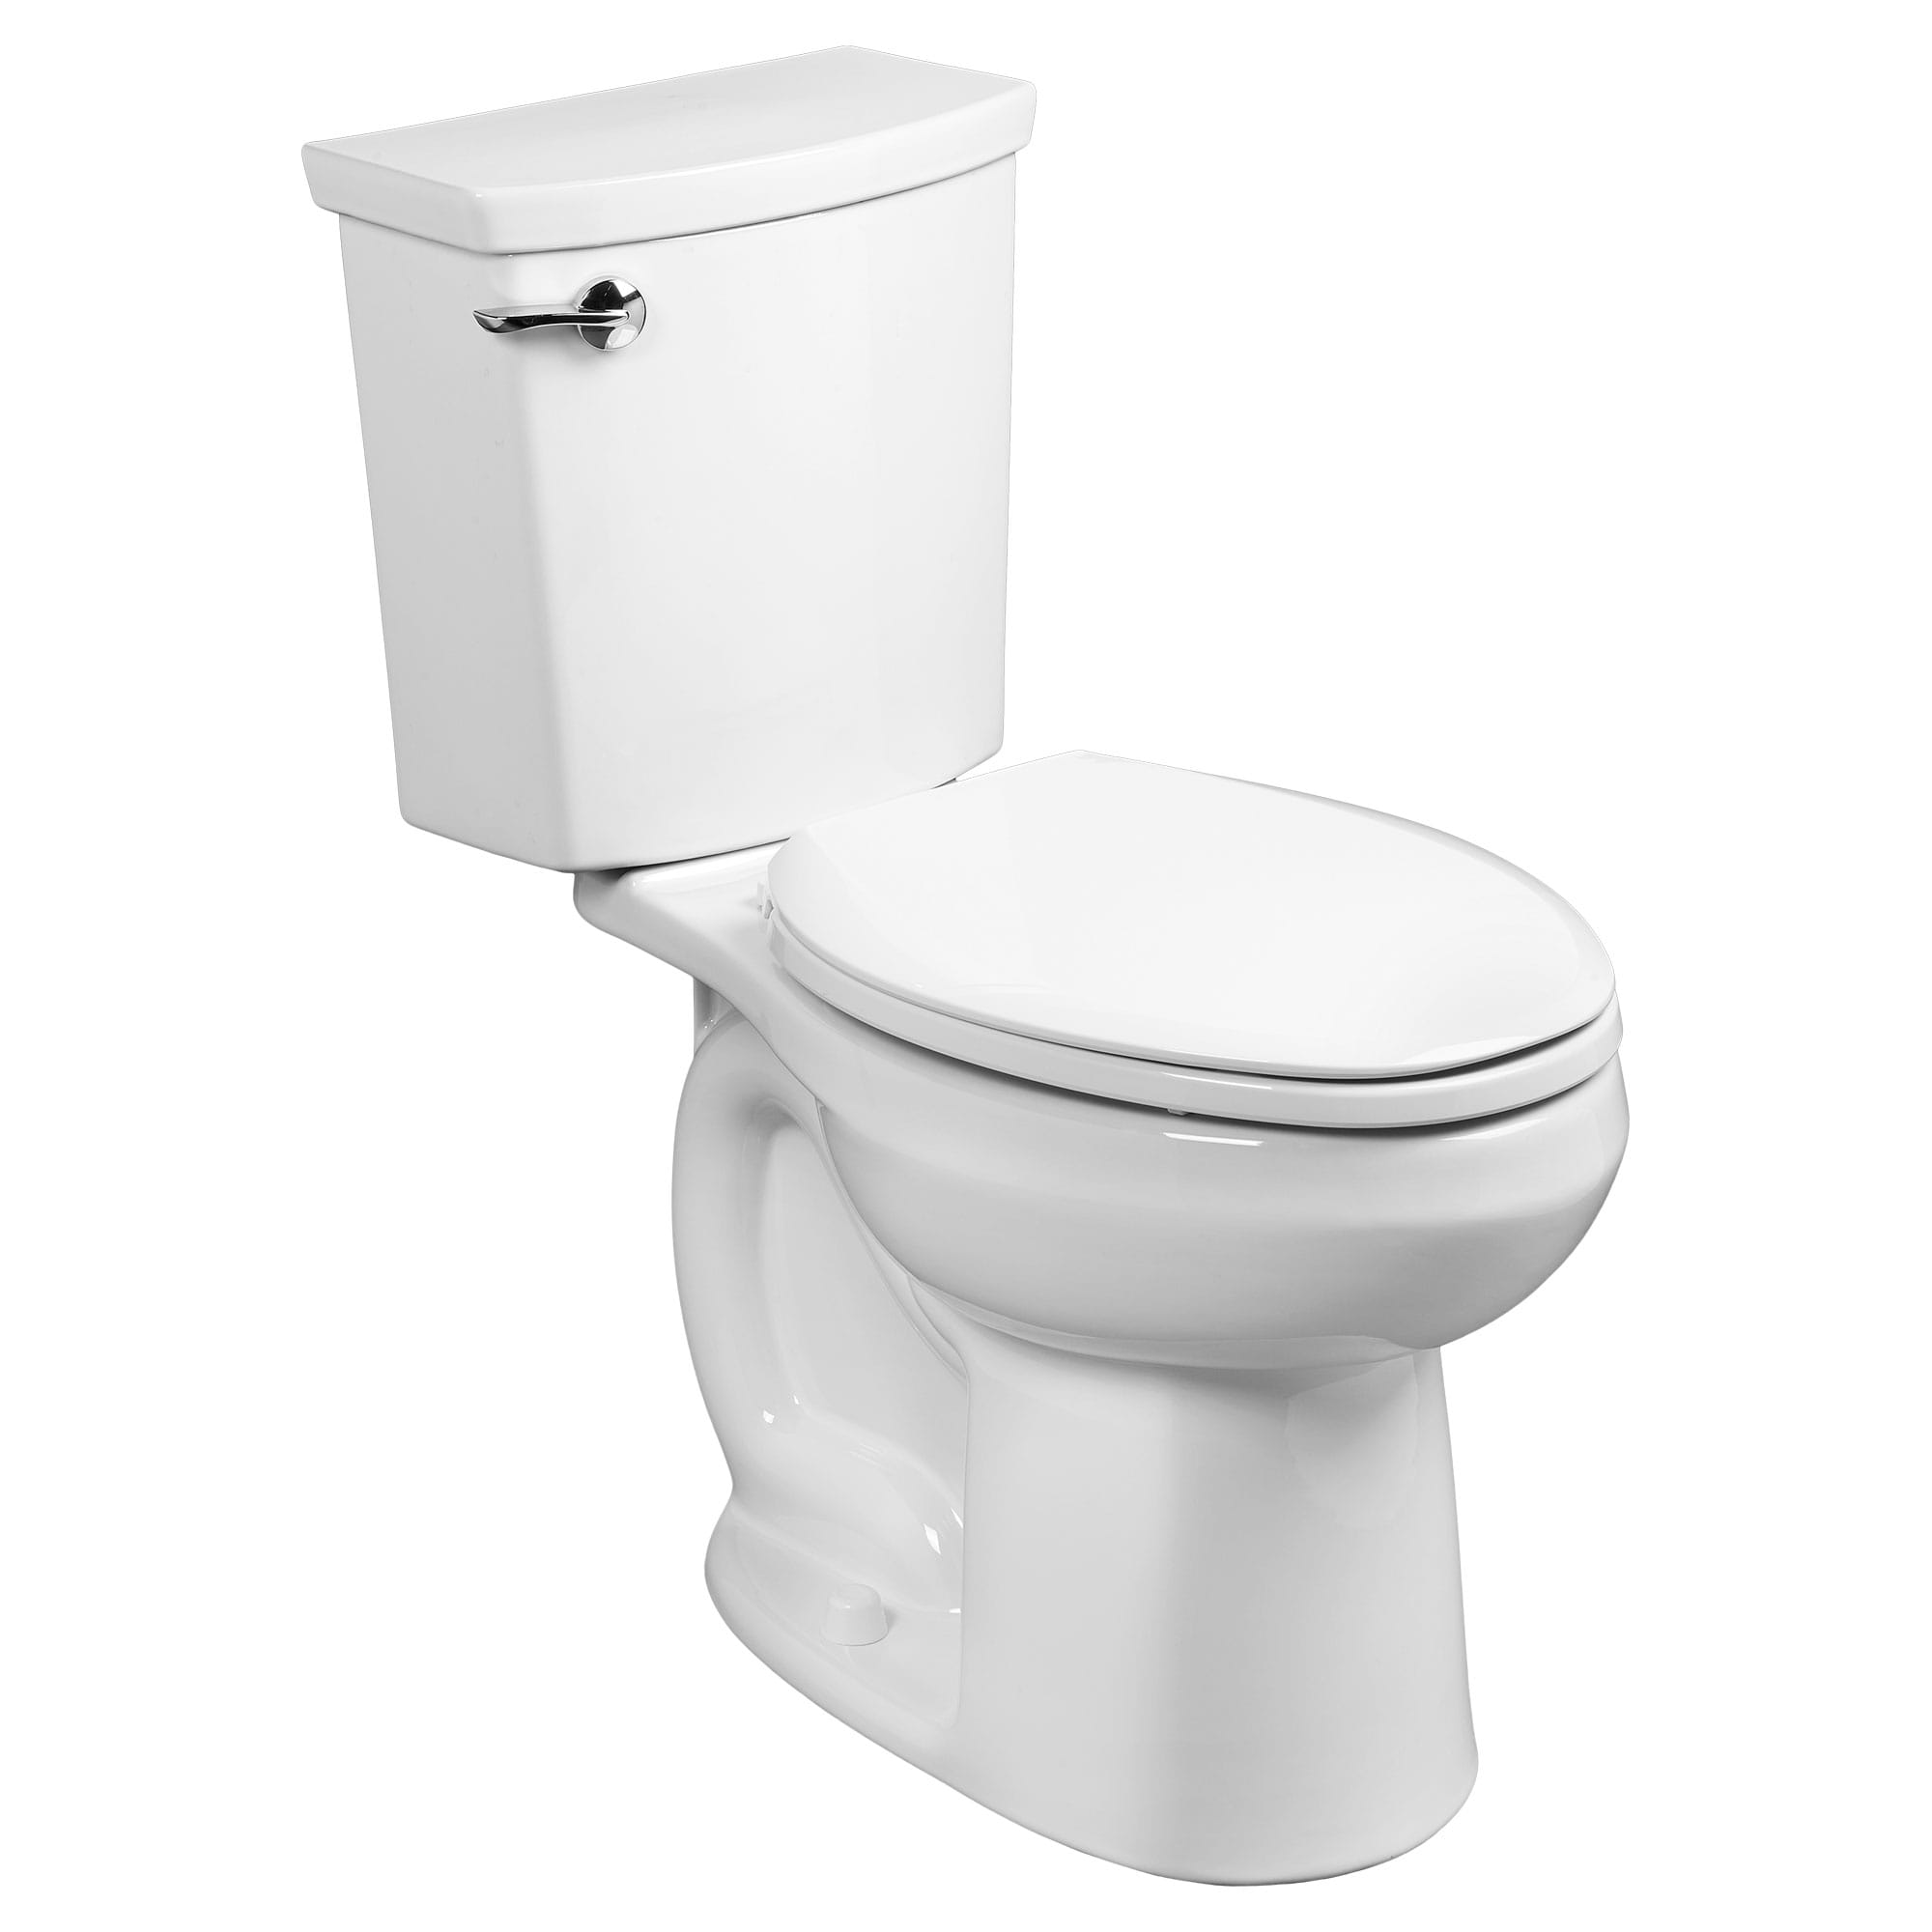 H2Optimum Two Piece 11 gpf 42 Lpf Chair Height Elongated Toilet Less Seat WHITE